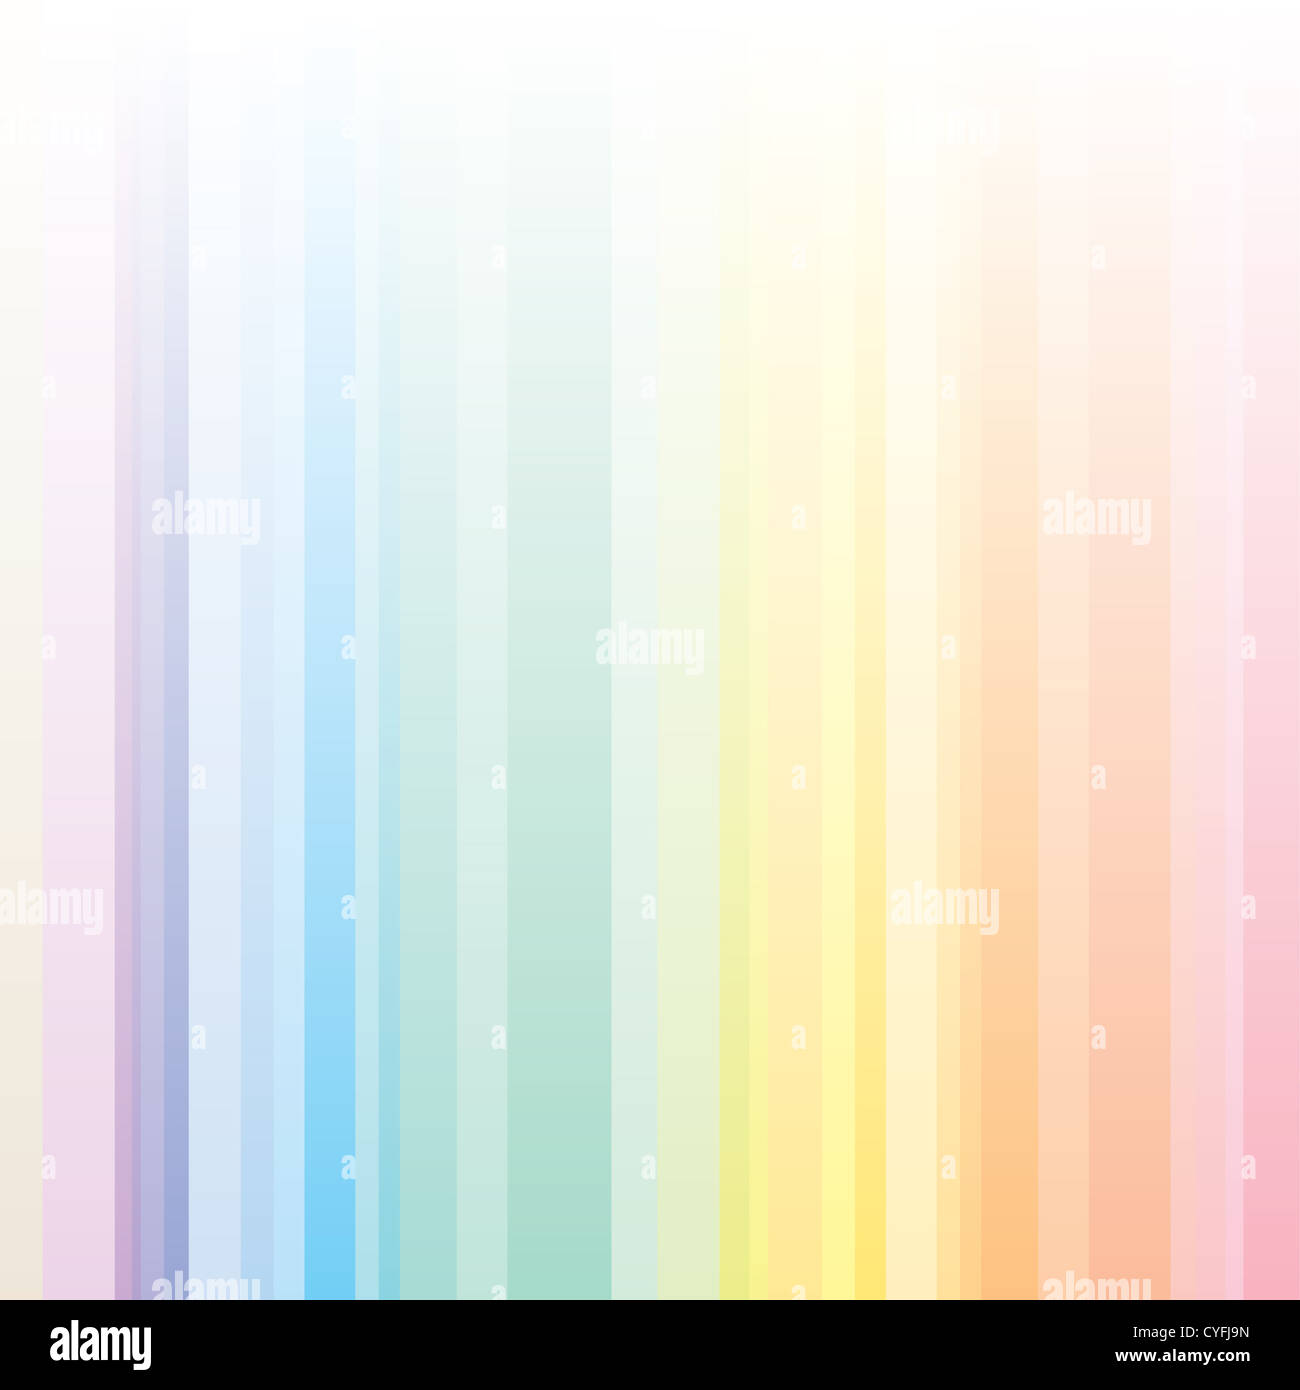 Seamless harmony stripes pattern with rainbow colors, ideal for a background. Stock Photo